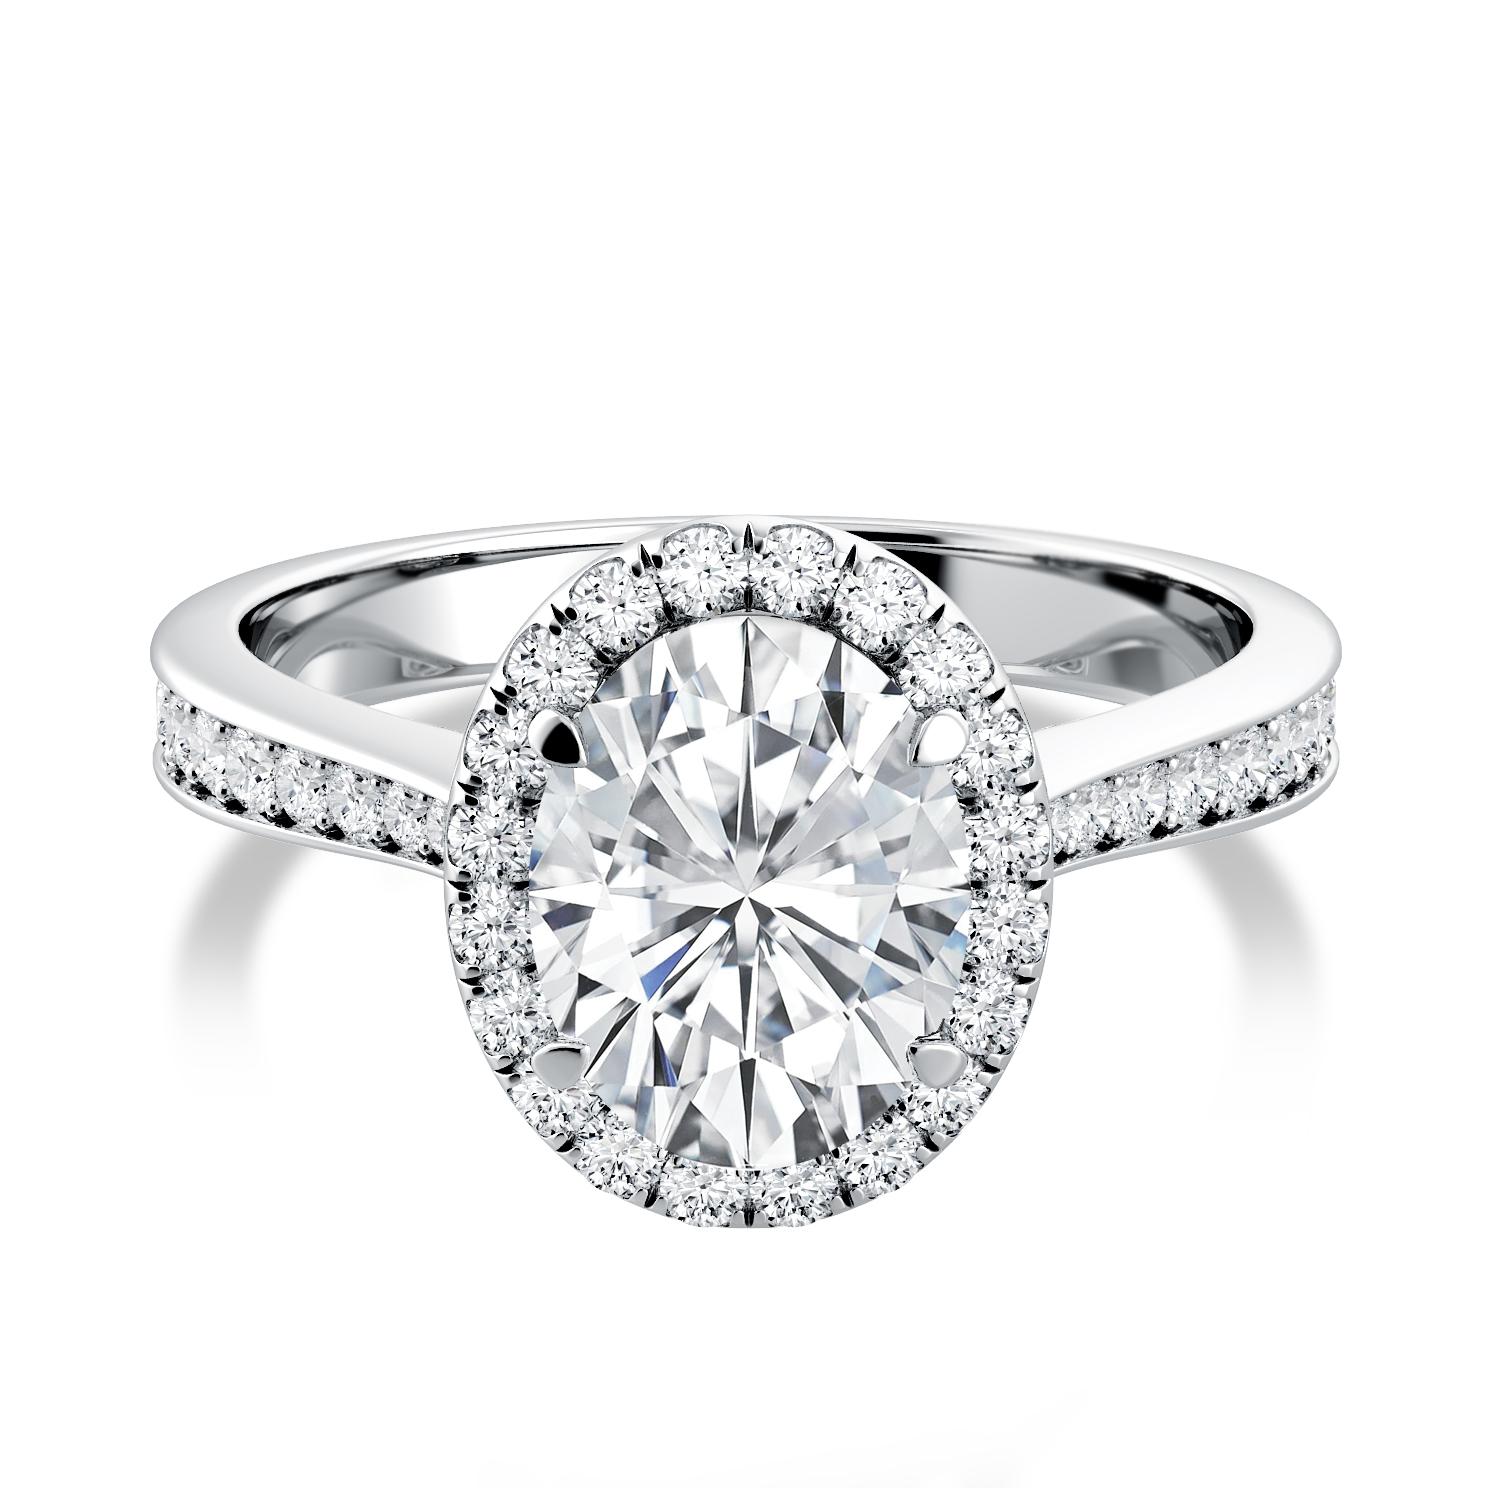 Oval Cut Diamond GIA Certified Engagement Anniversary 950 Platinum In New Condition For Sale In Tarzana, CA